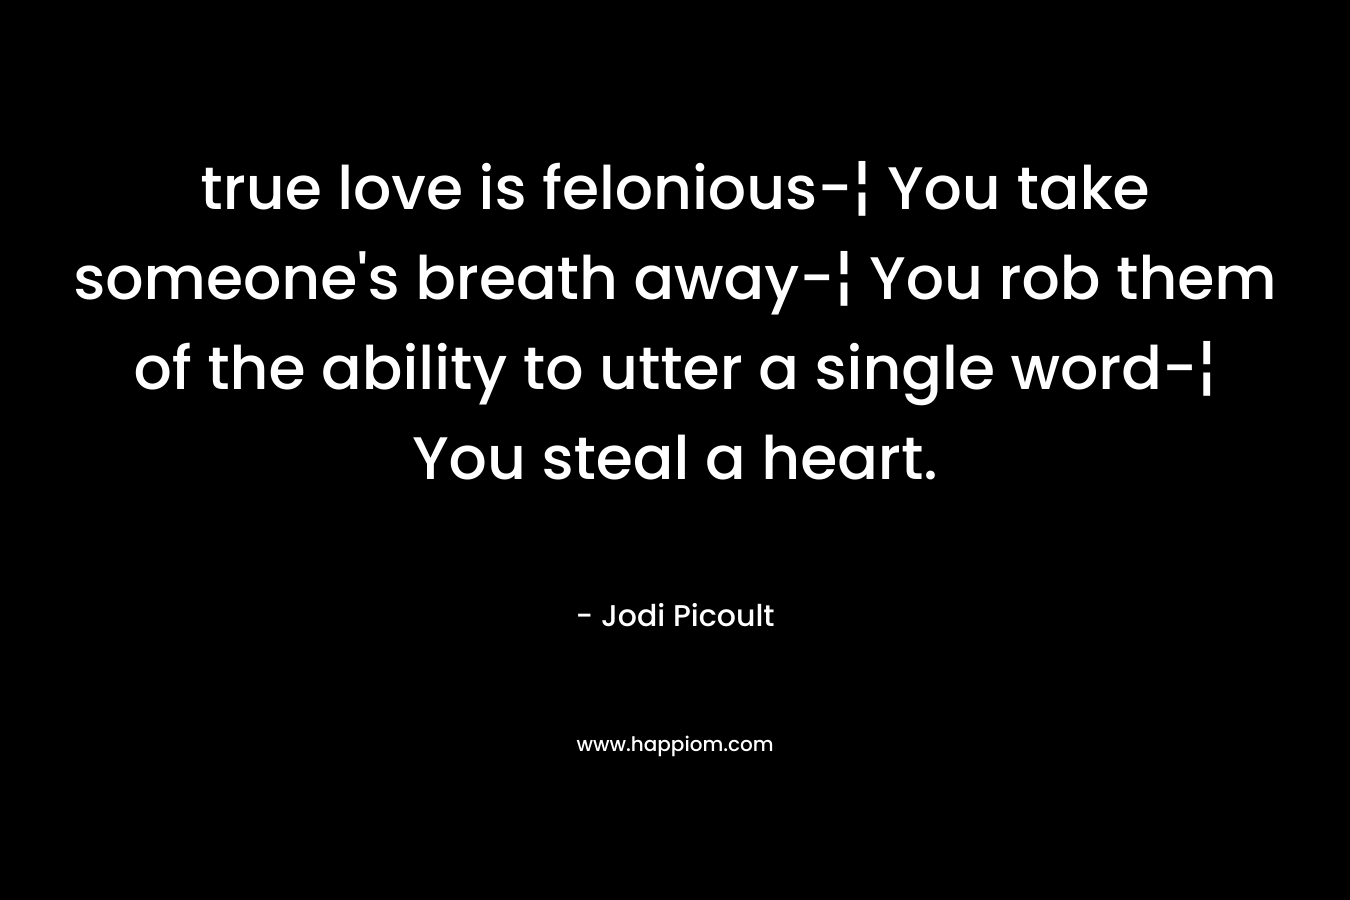 true love is felonious-¦ You take someone's breath away-¦ You rob them of the ability to utter a single word-¦ You steal a heart.